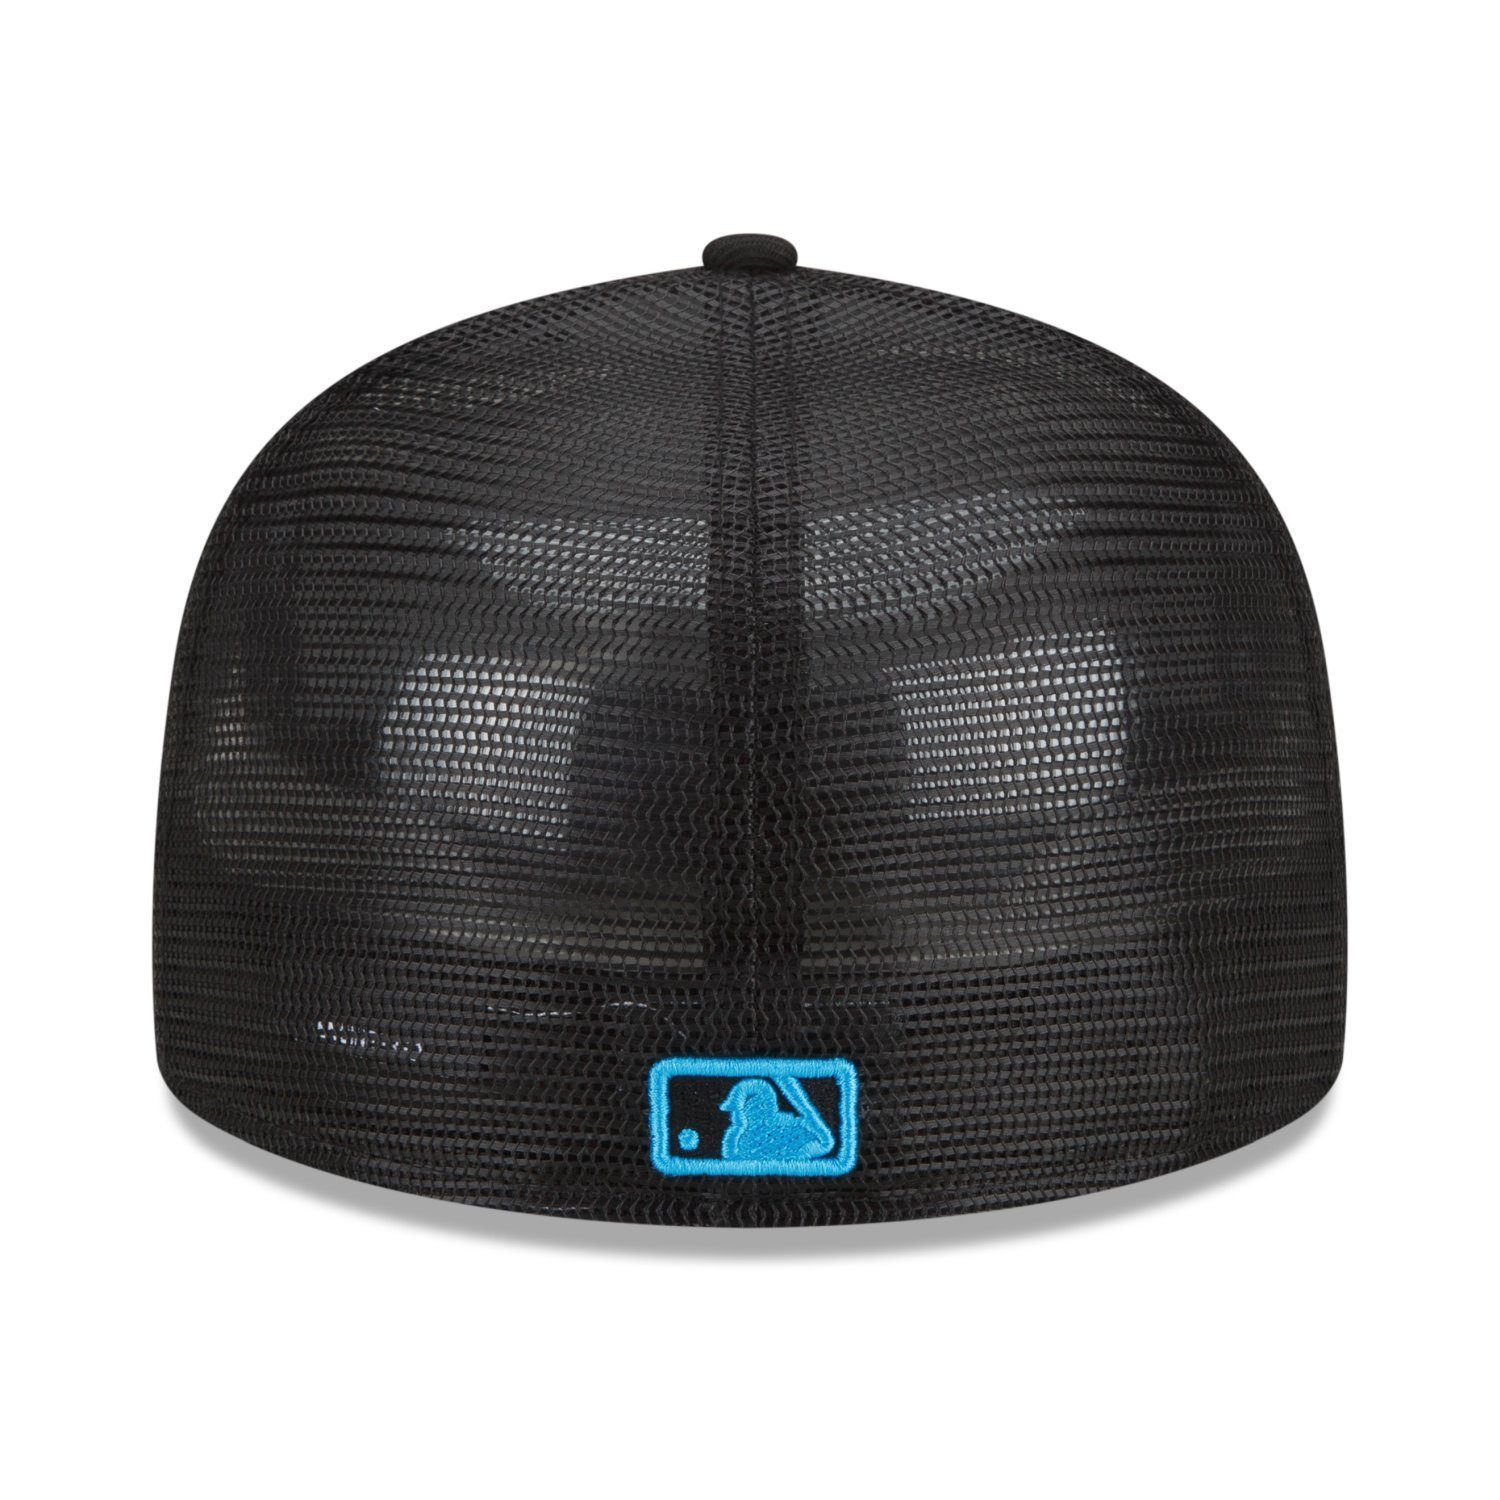 New BATTING Cap Miami Marlins Fitted Era 59Fifty PRACTICE